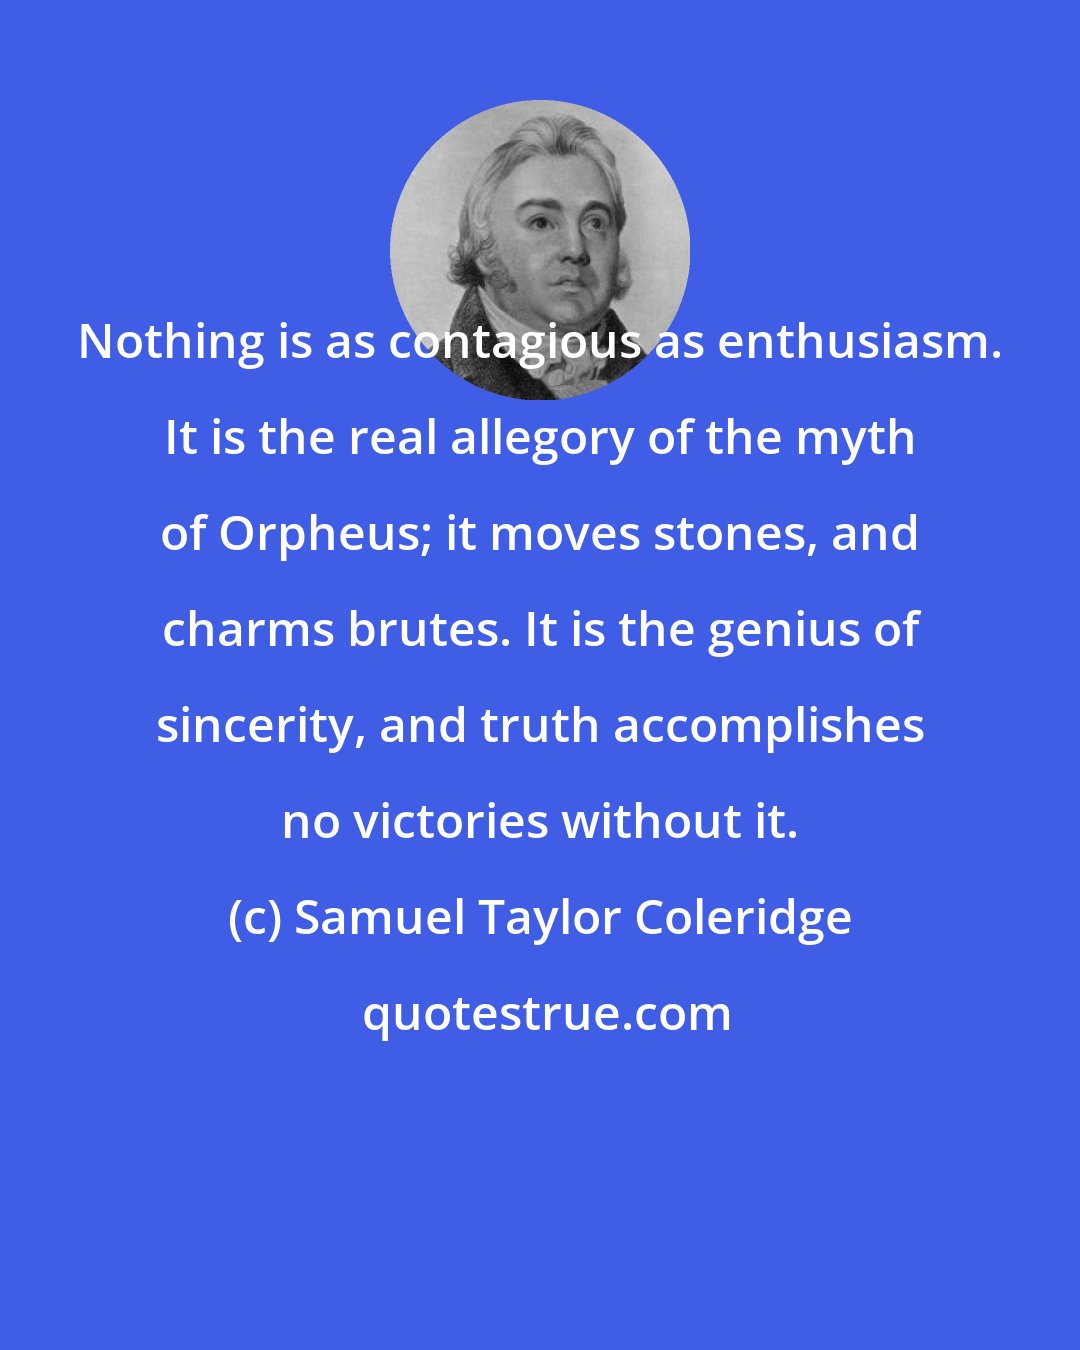 Samuel Taylor Coleridge: Nothing is as contagious as enthusiasm. It is the real allegory of the myth of Orpheus; it moves stones, and charms brutes. It is the genius of sincerity, and truth accomplishes no victories without it.